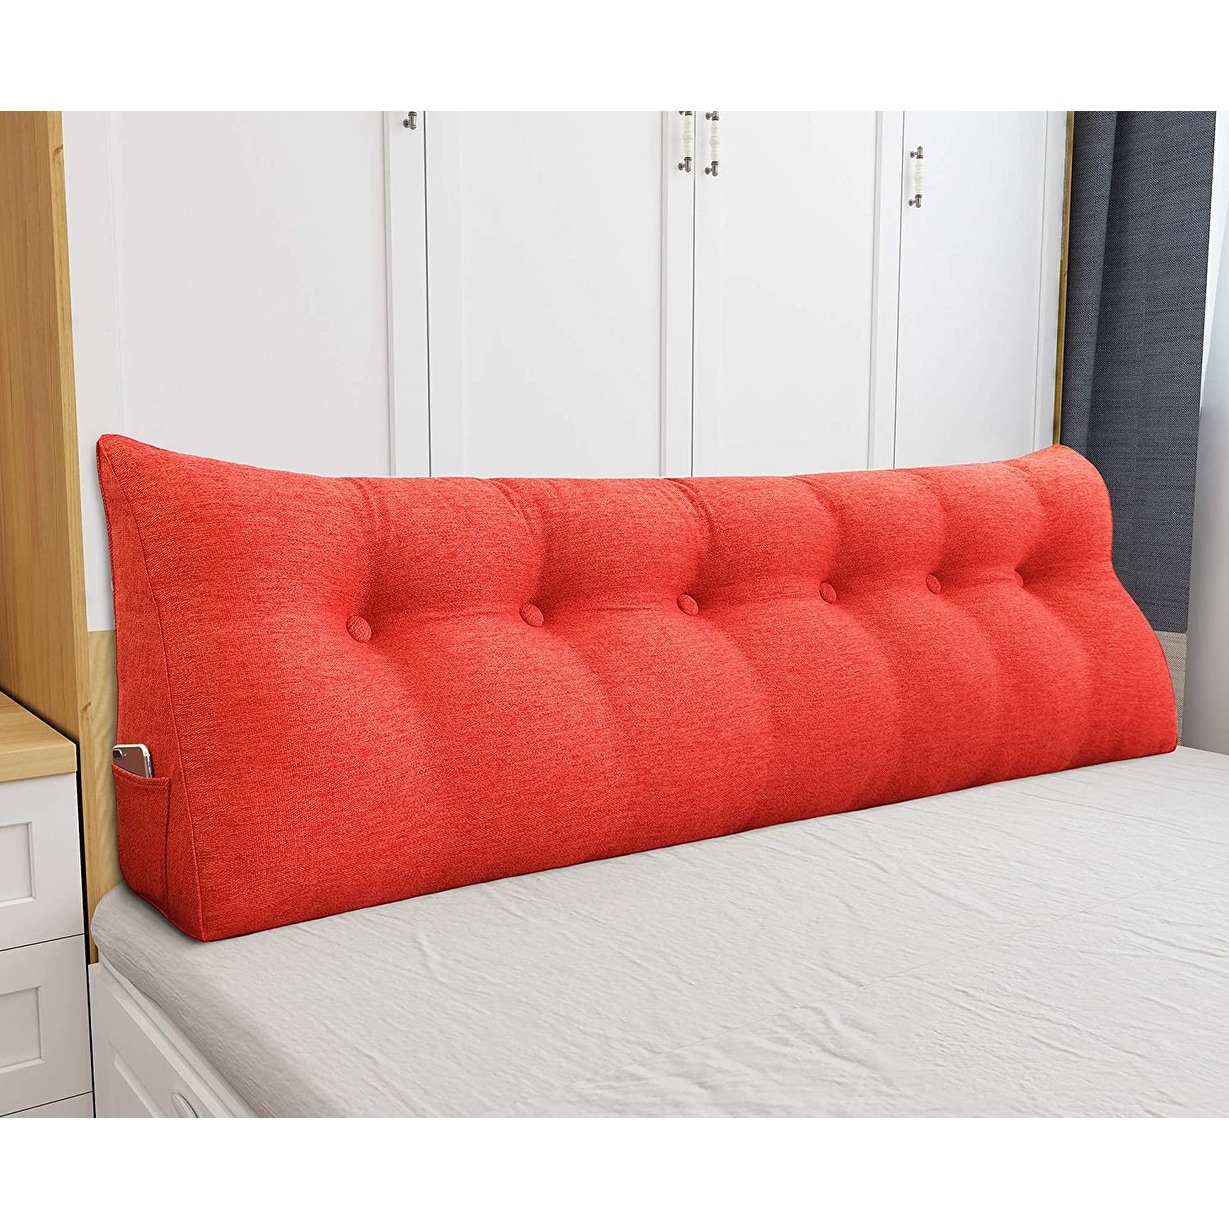 https://ak1.ostkcdn.com/images/products/is/images/direct/2d87165ec0476e9d5b9875fbd1b190a214d9f546/WOWMAX-Bed-Rest-Wedge-Bolster-Lumbar-Bunk-Daybed-Pillow.jpg